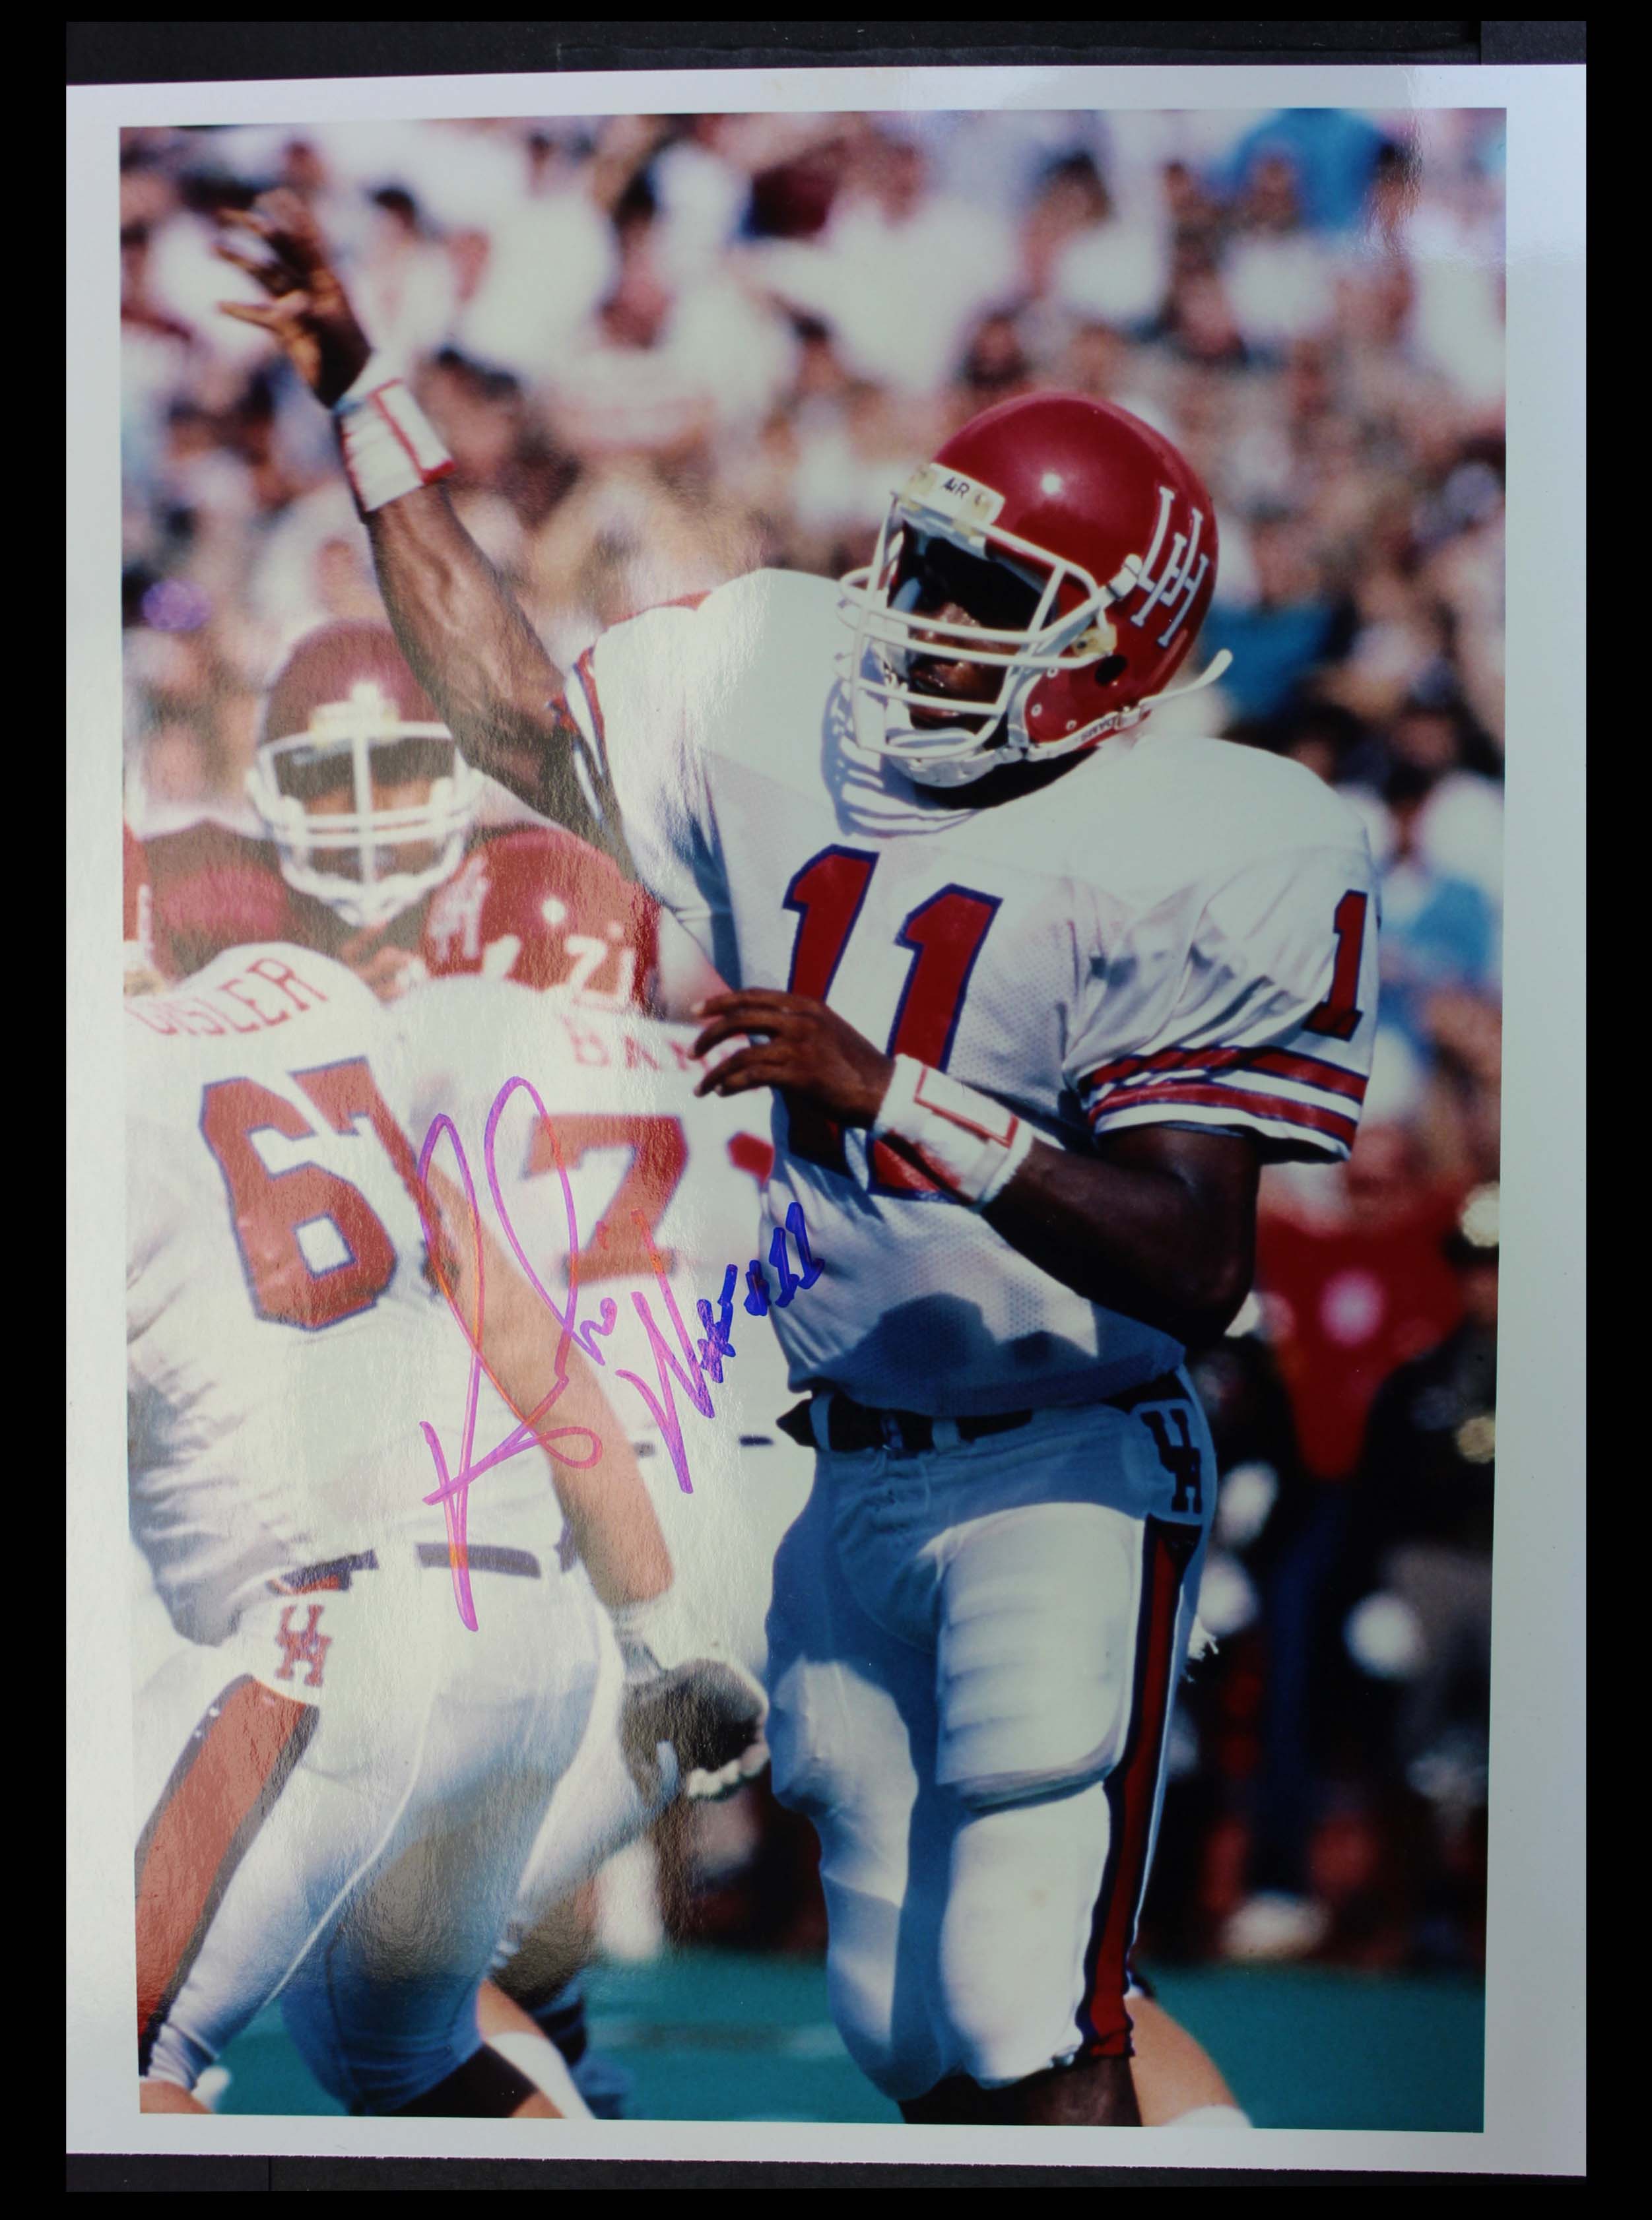    -  Andre Ware 1990s Football Autographed 8x10 Photo